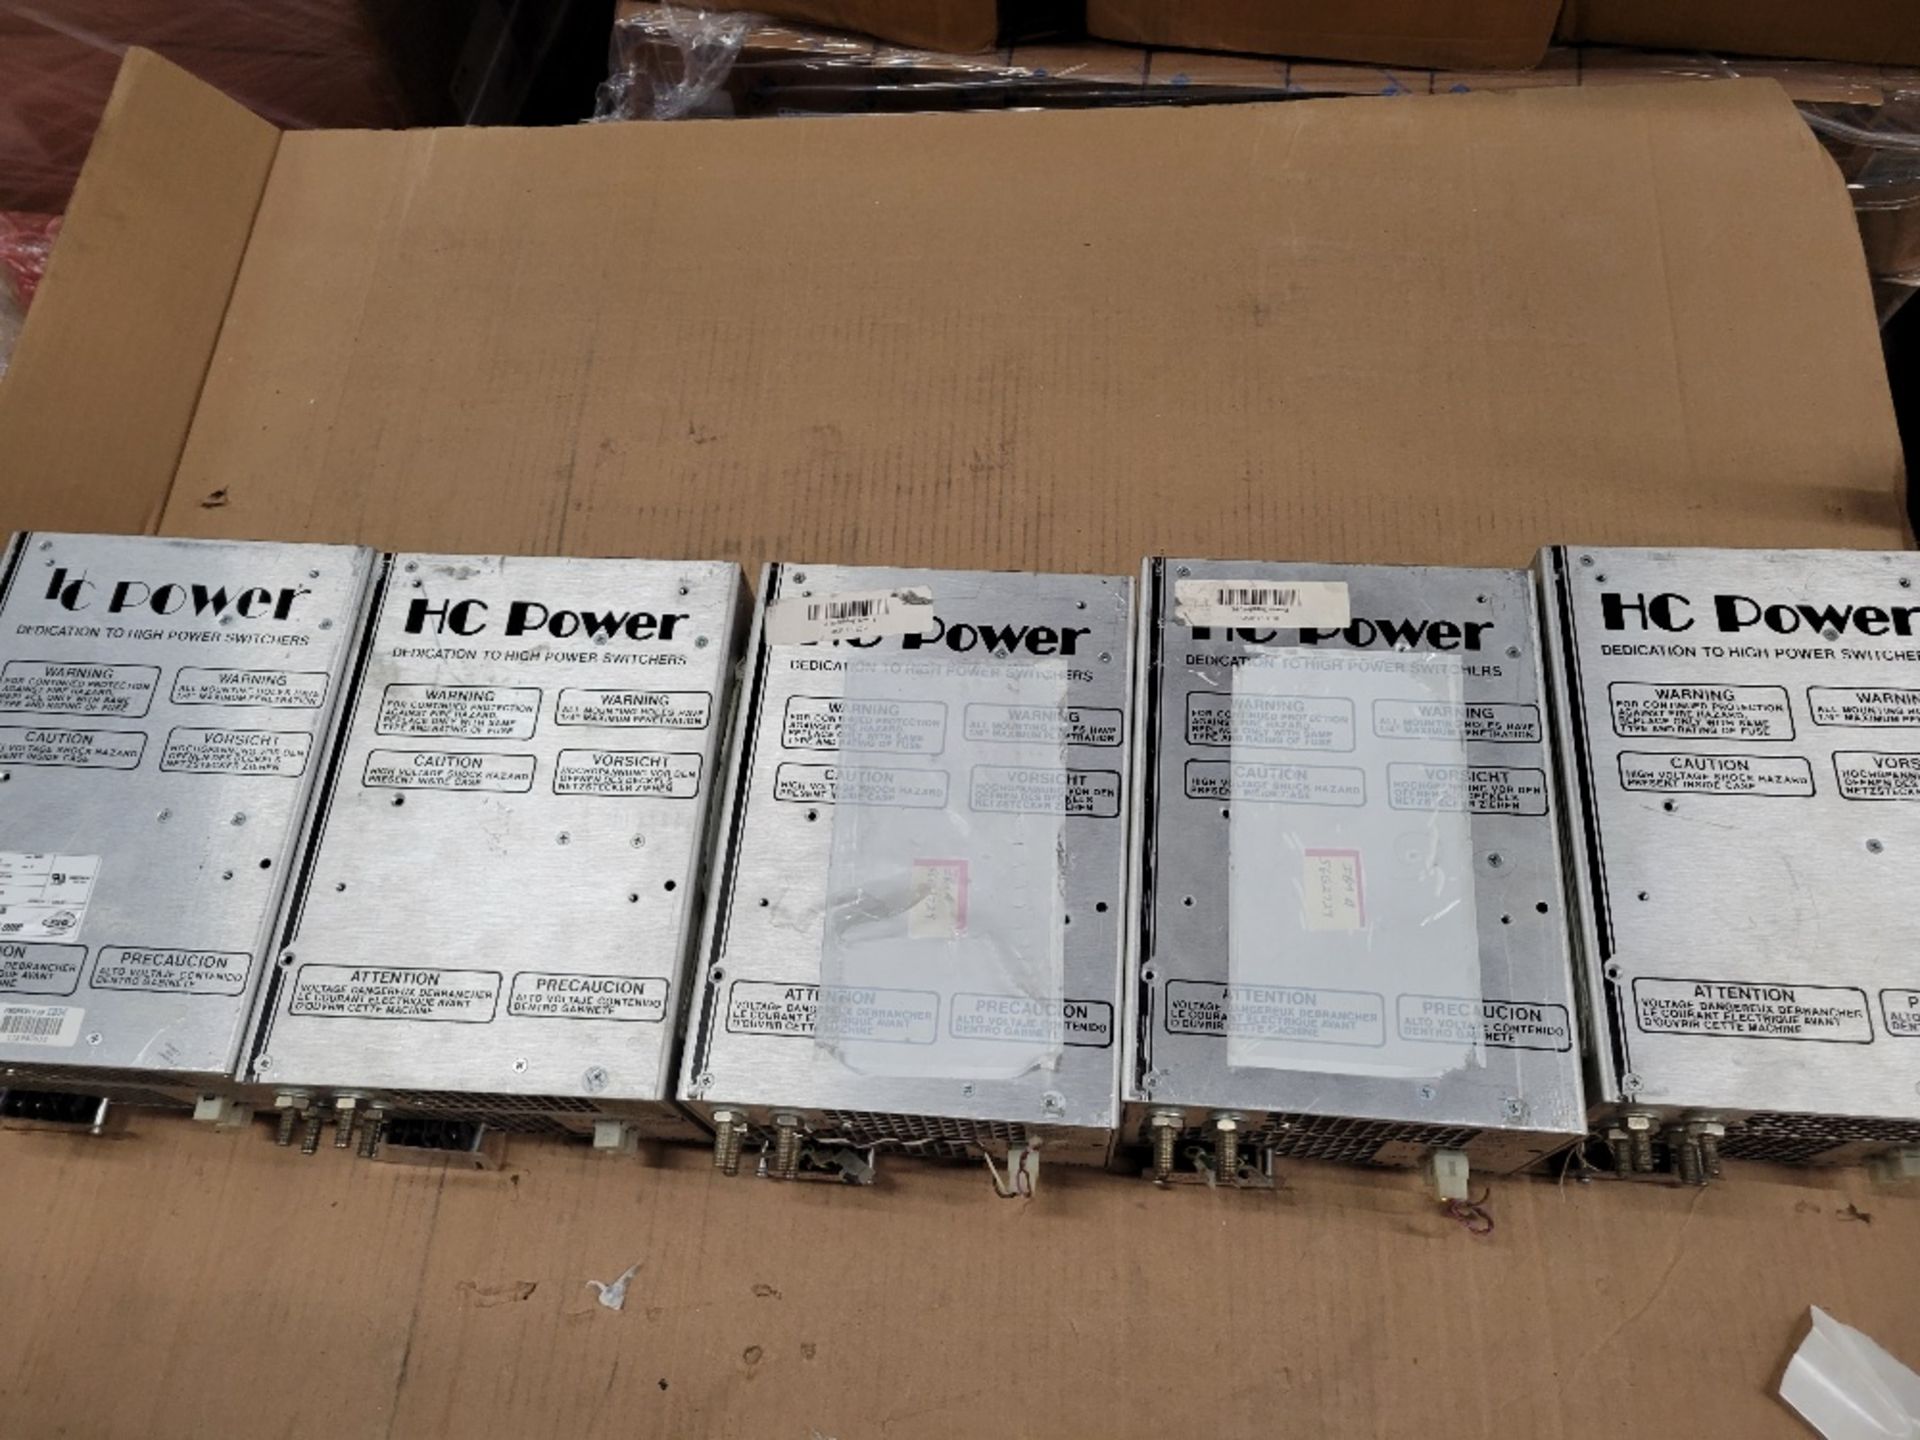 5x HC Power Used Surplus HC18-1 Other Power Supplies 20A:360A 230VAC:5V